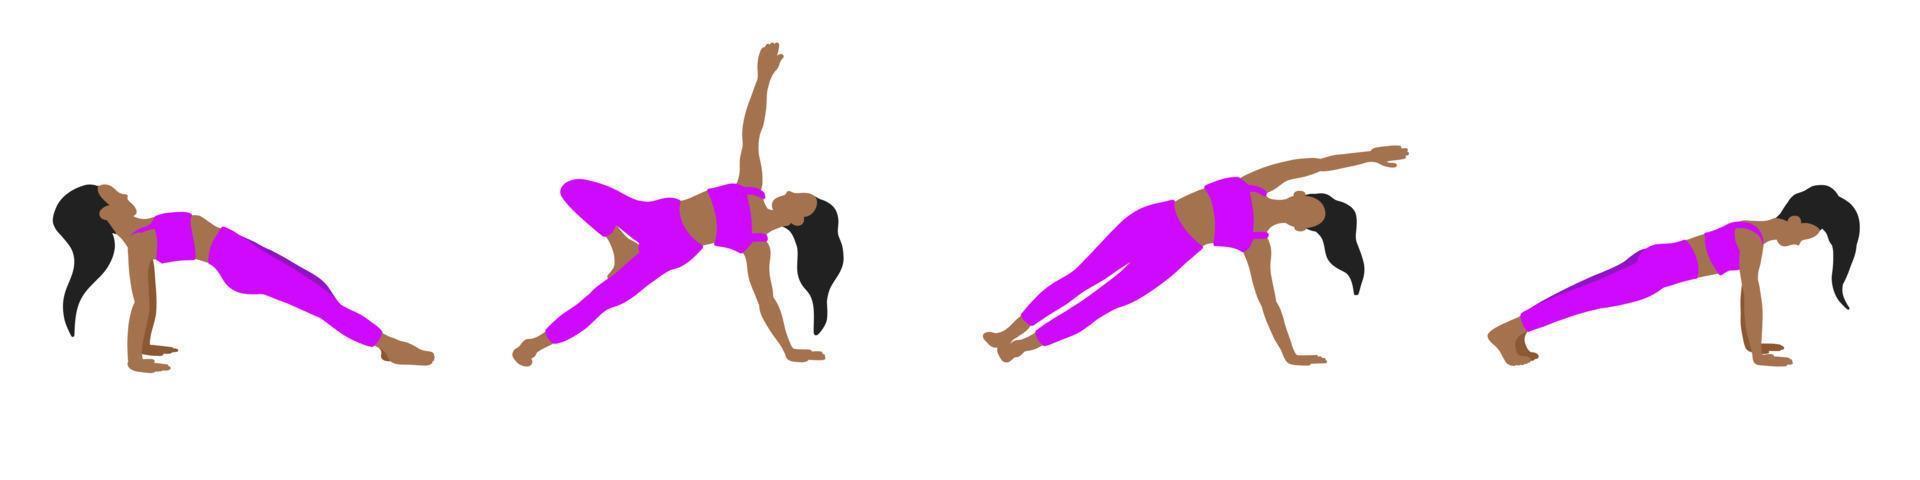 Flexibility yoga poses collection. African American longhair female, lady, woman, girl. Pilates, mental health, training, gym. Vector illustration in cartoon flat style isolated on white background.